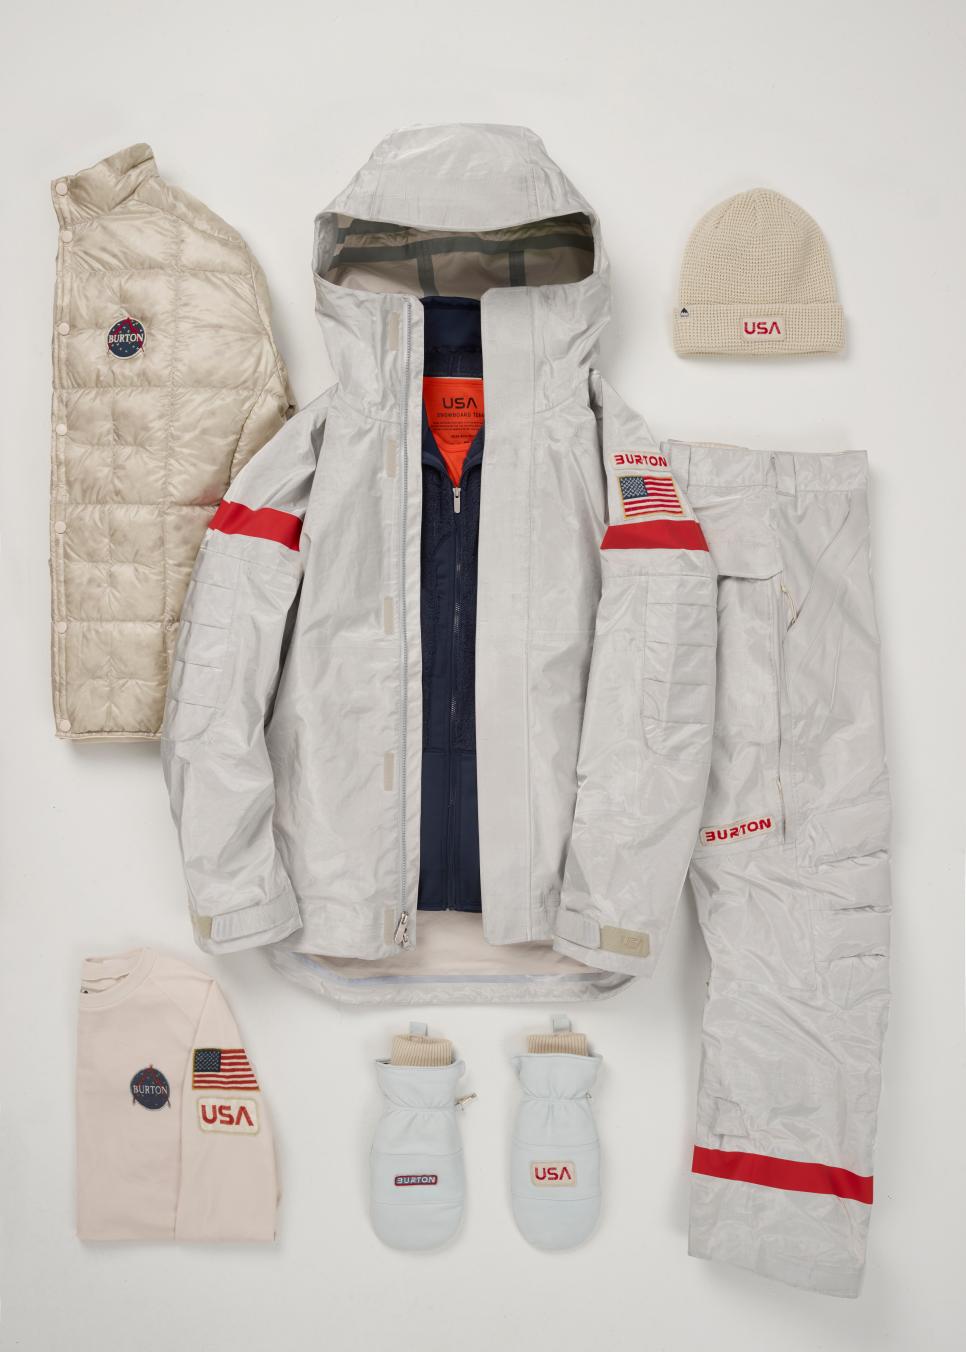 Burton’s NASA-inspired Winter Olympics snowboard uniforms are out of